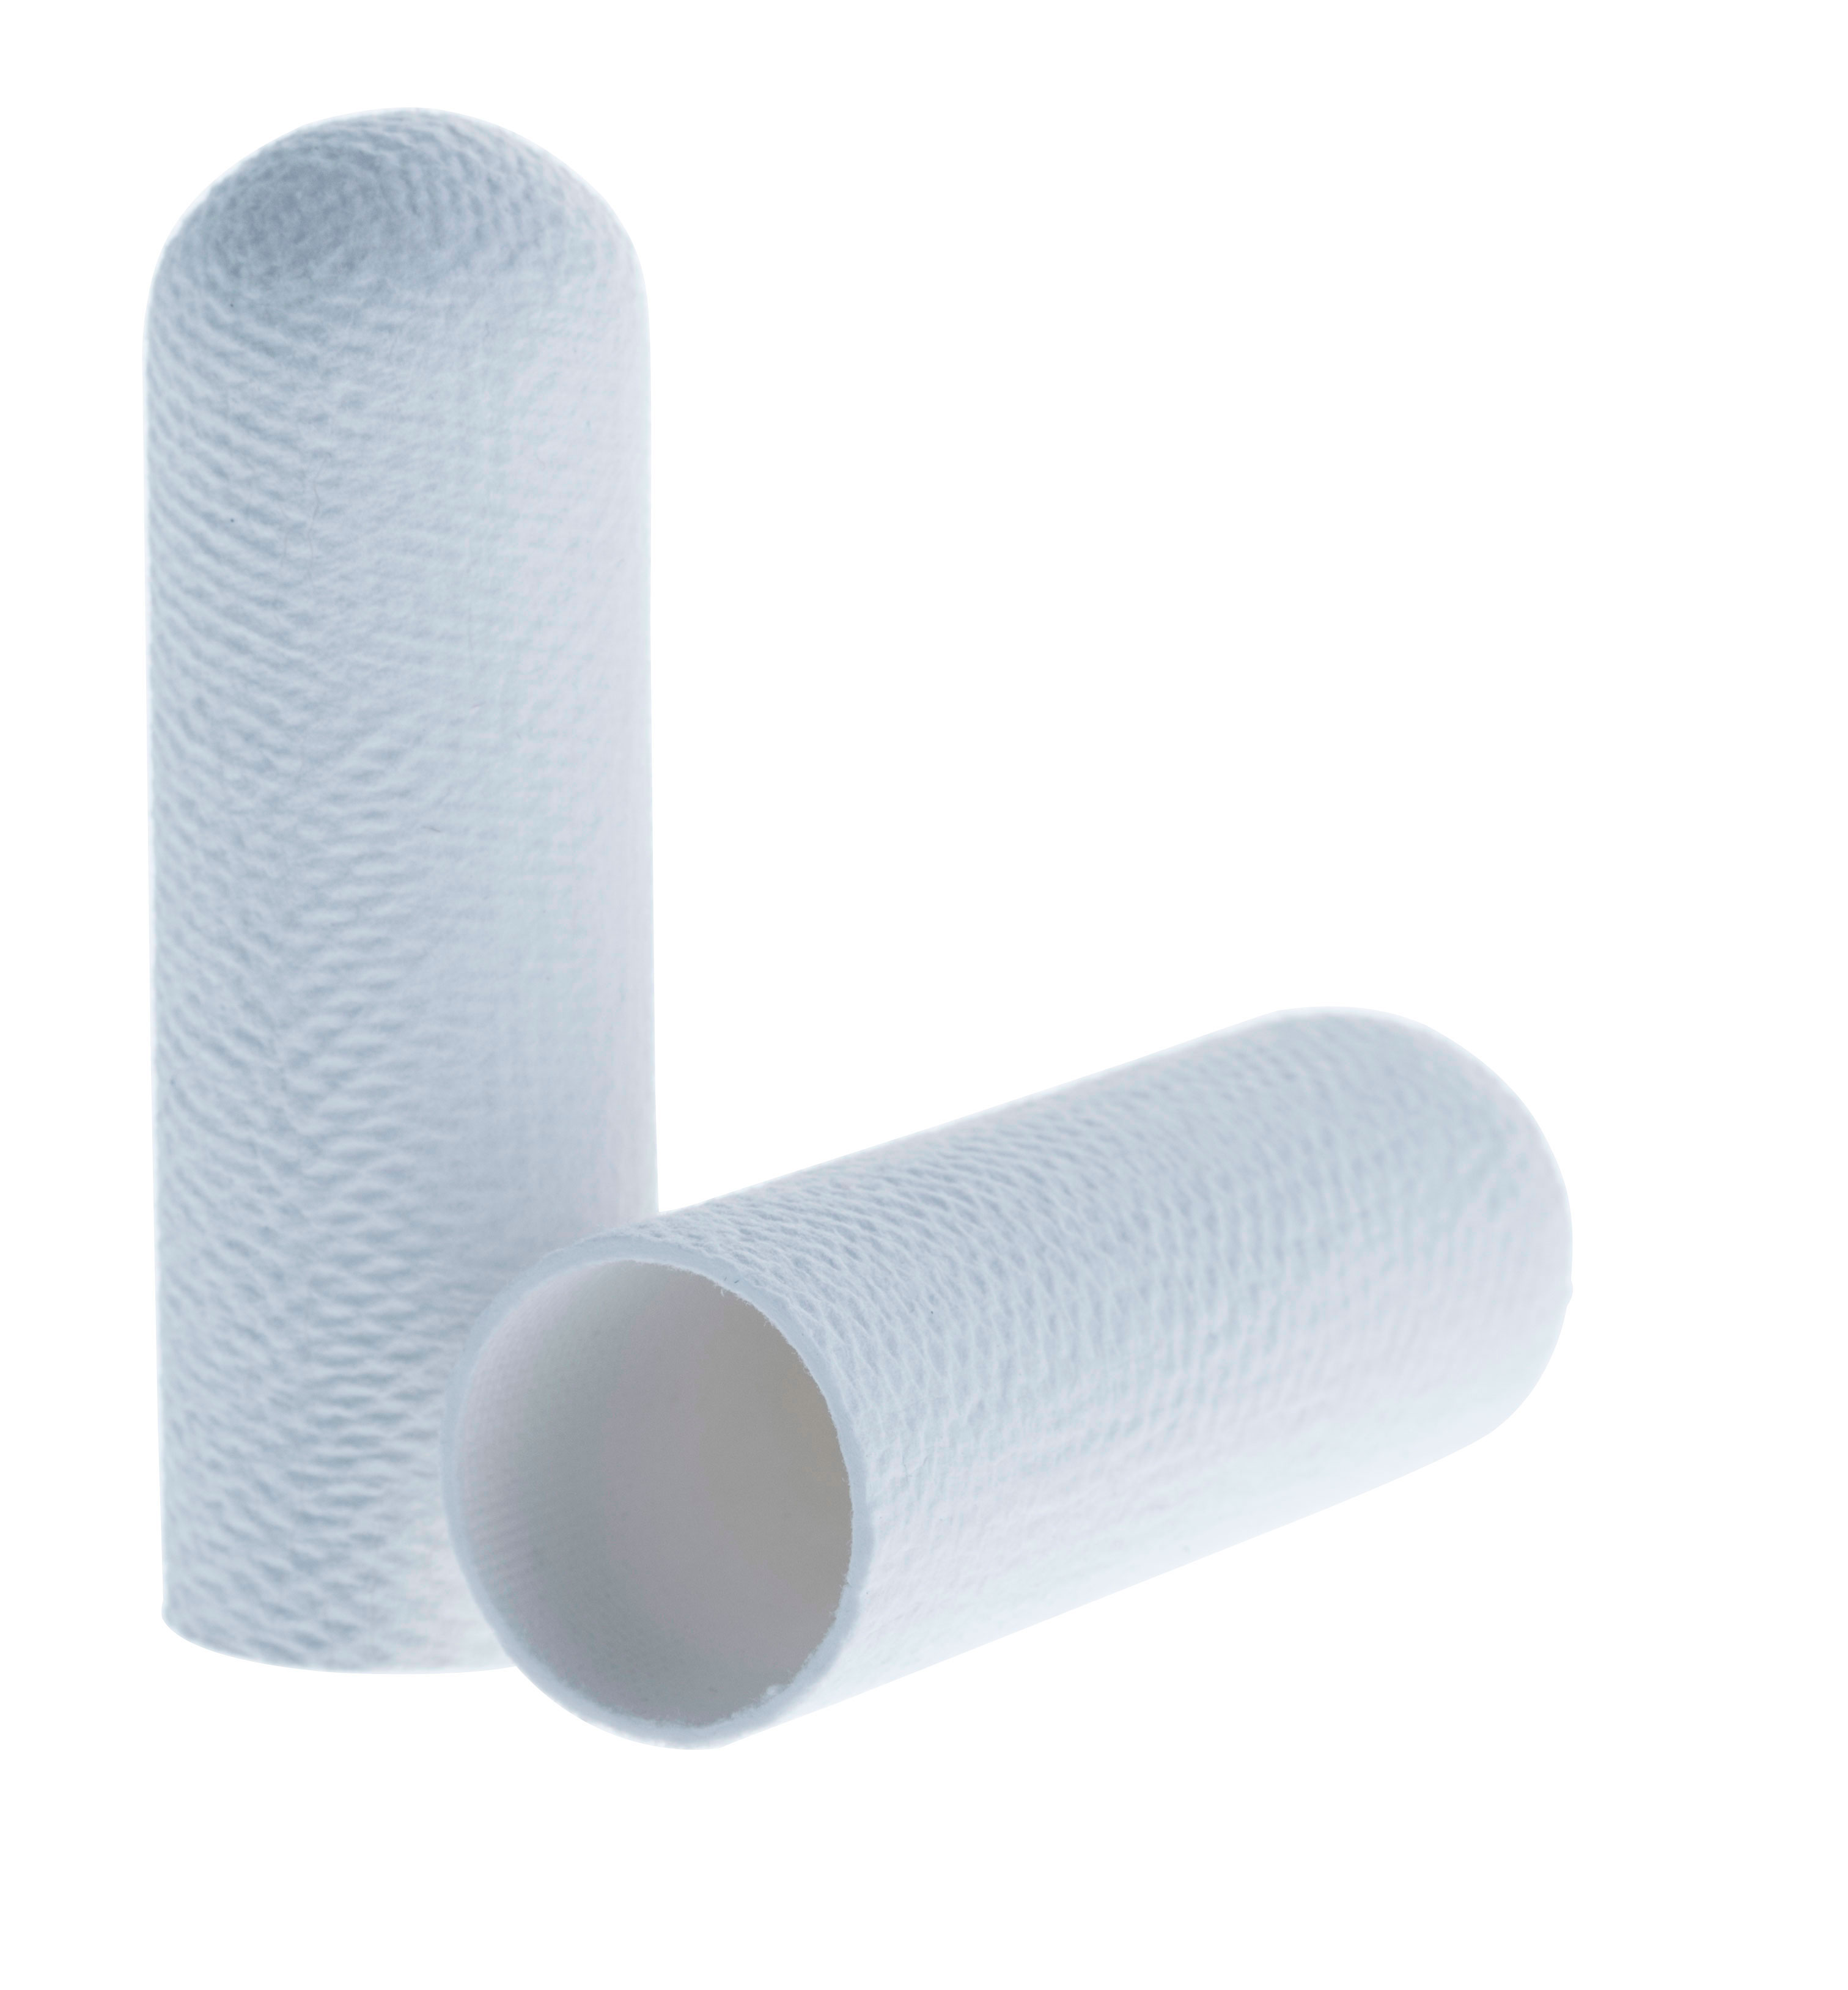 Cellulose extraction thimbles for Soxhlet extraction. SCHARLAU. Standard cellulose cartridge. Dim. Øxlength: 40x150mm. Particle retention in liquid: Nom. 8-15 microns